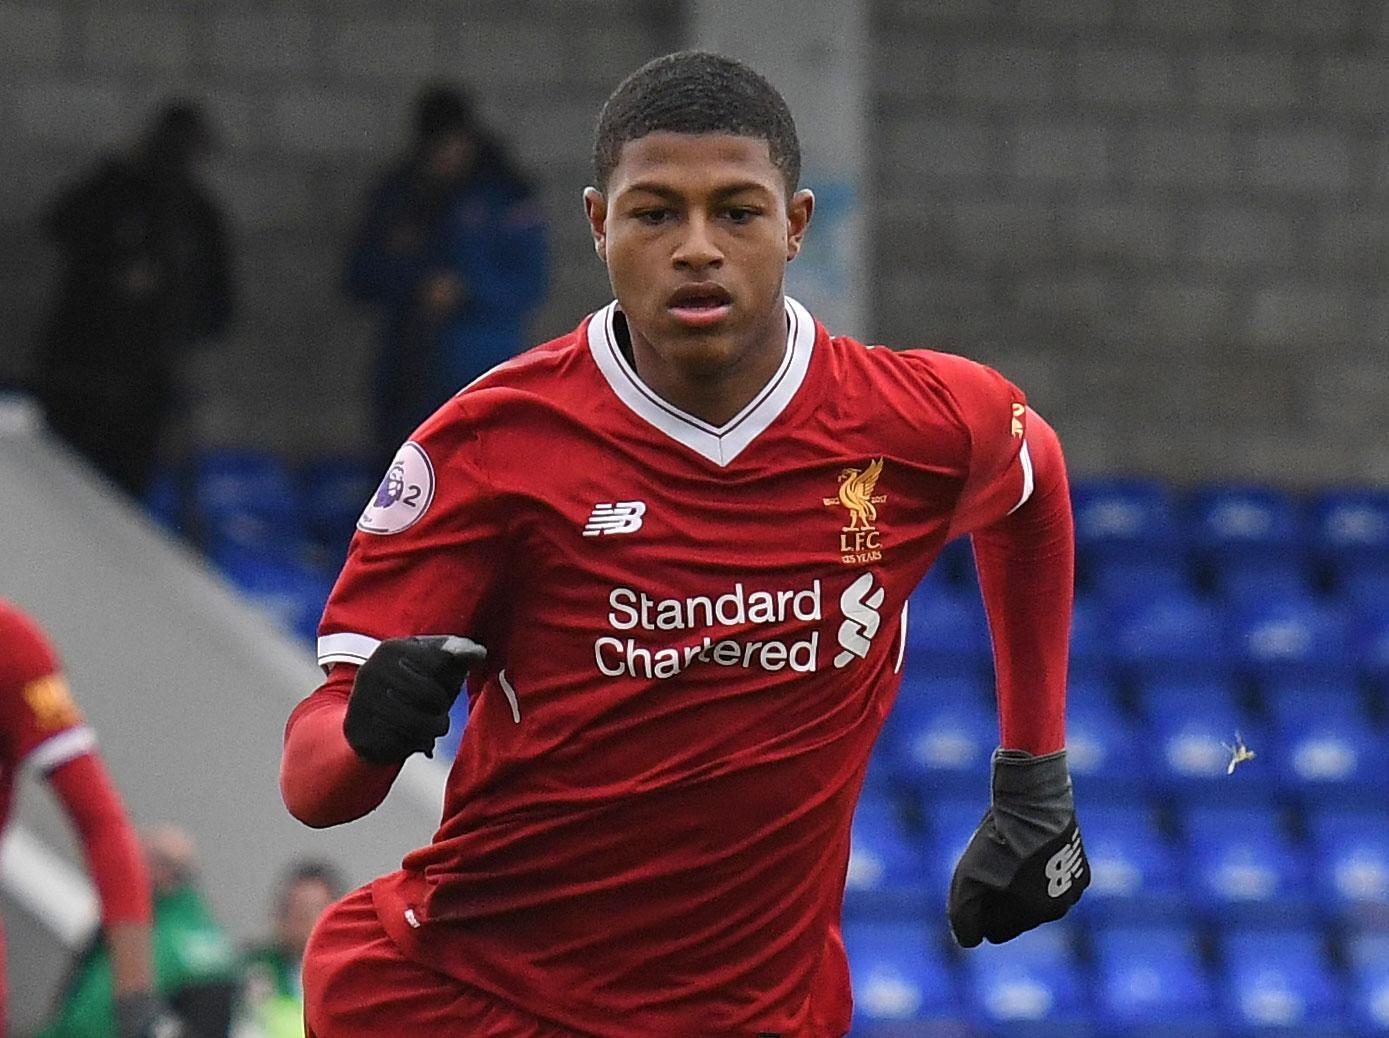 Liverpool reported Spartak to the governing body after Brewster made the allegation